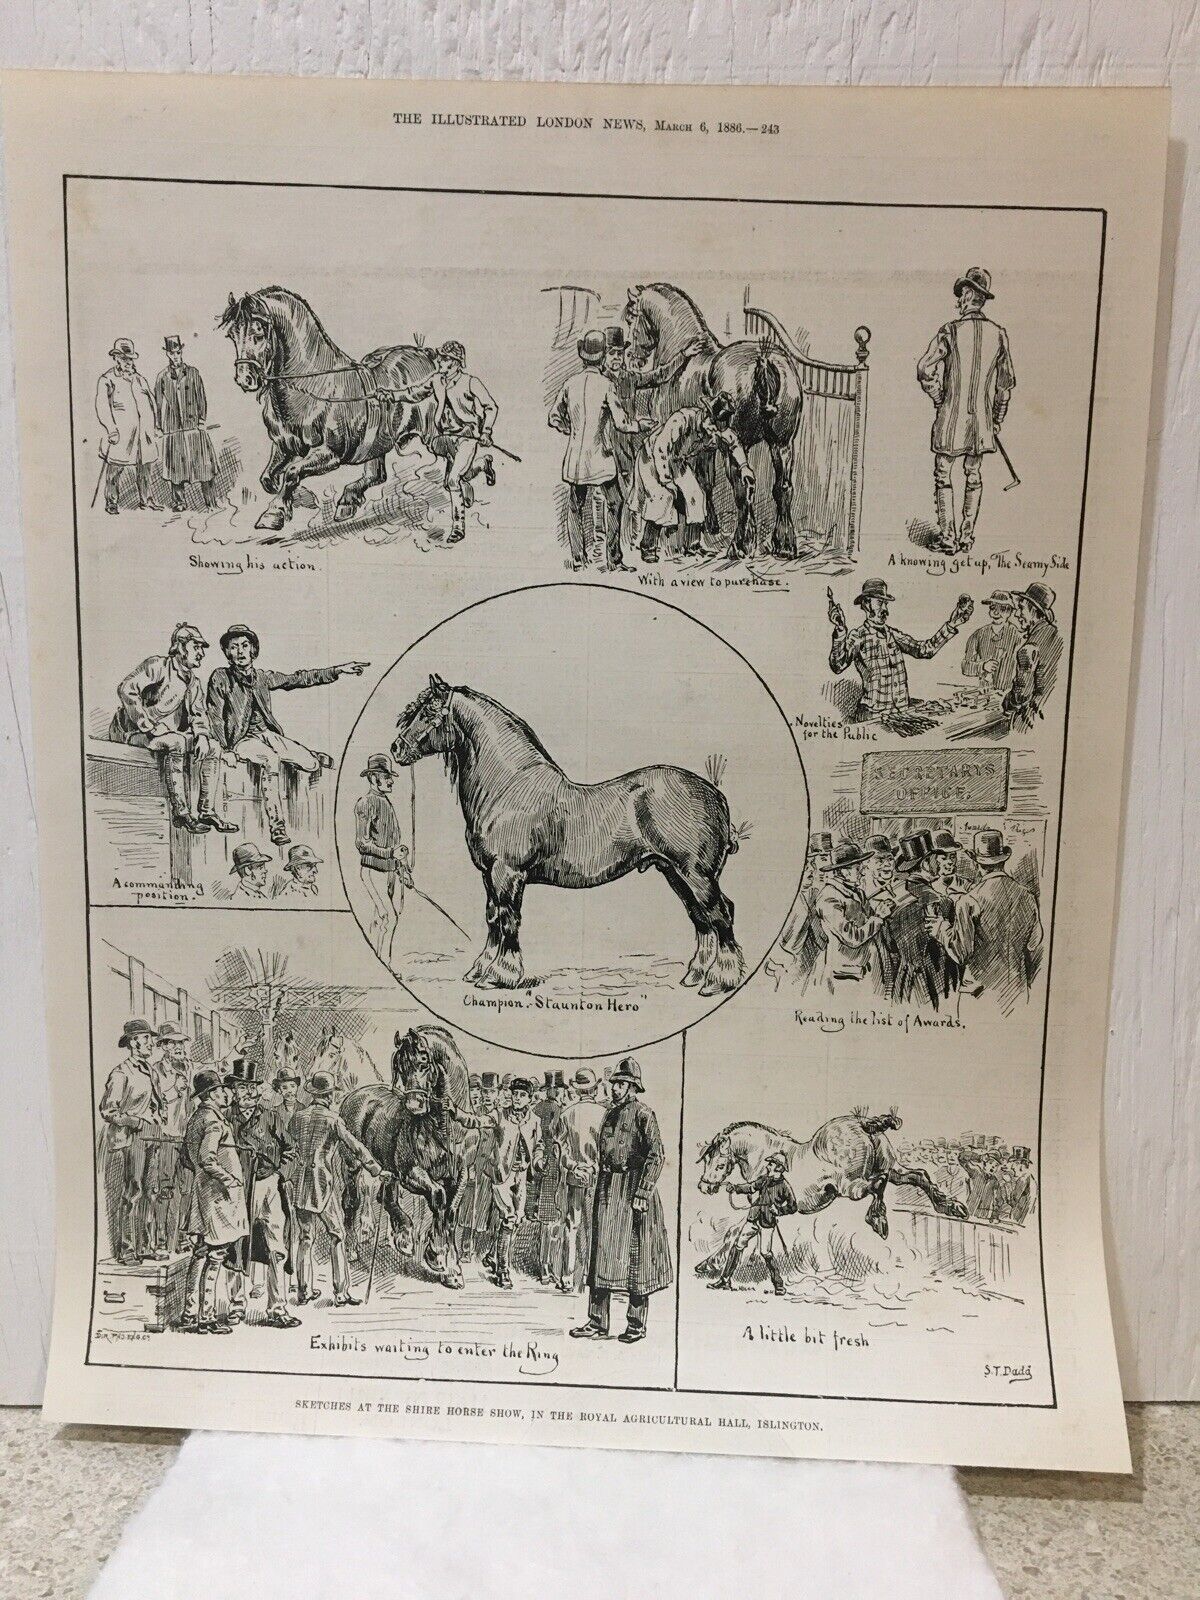 THE ILLUSTRATED LONDON NEWS - March 1886 - Sketches At The Horse Show Islington